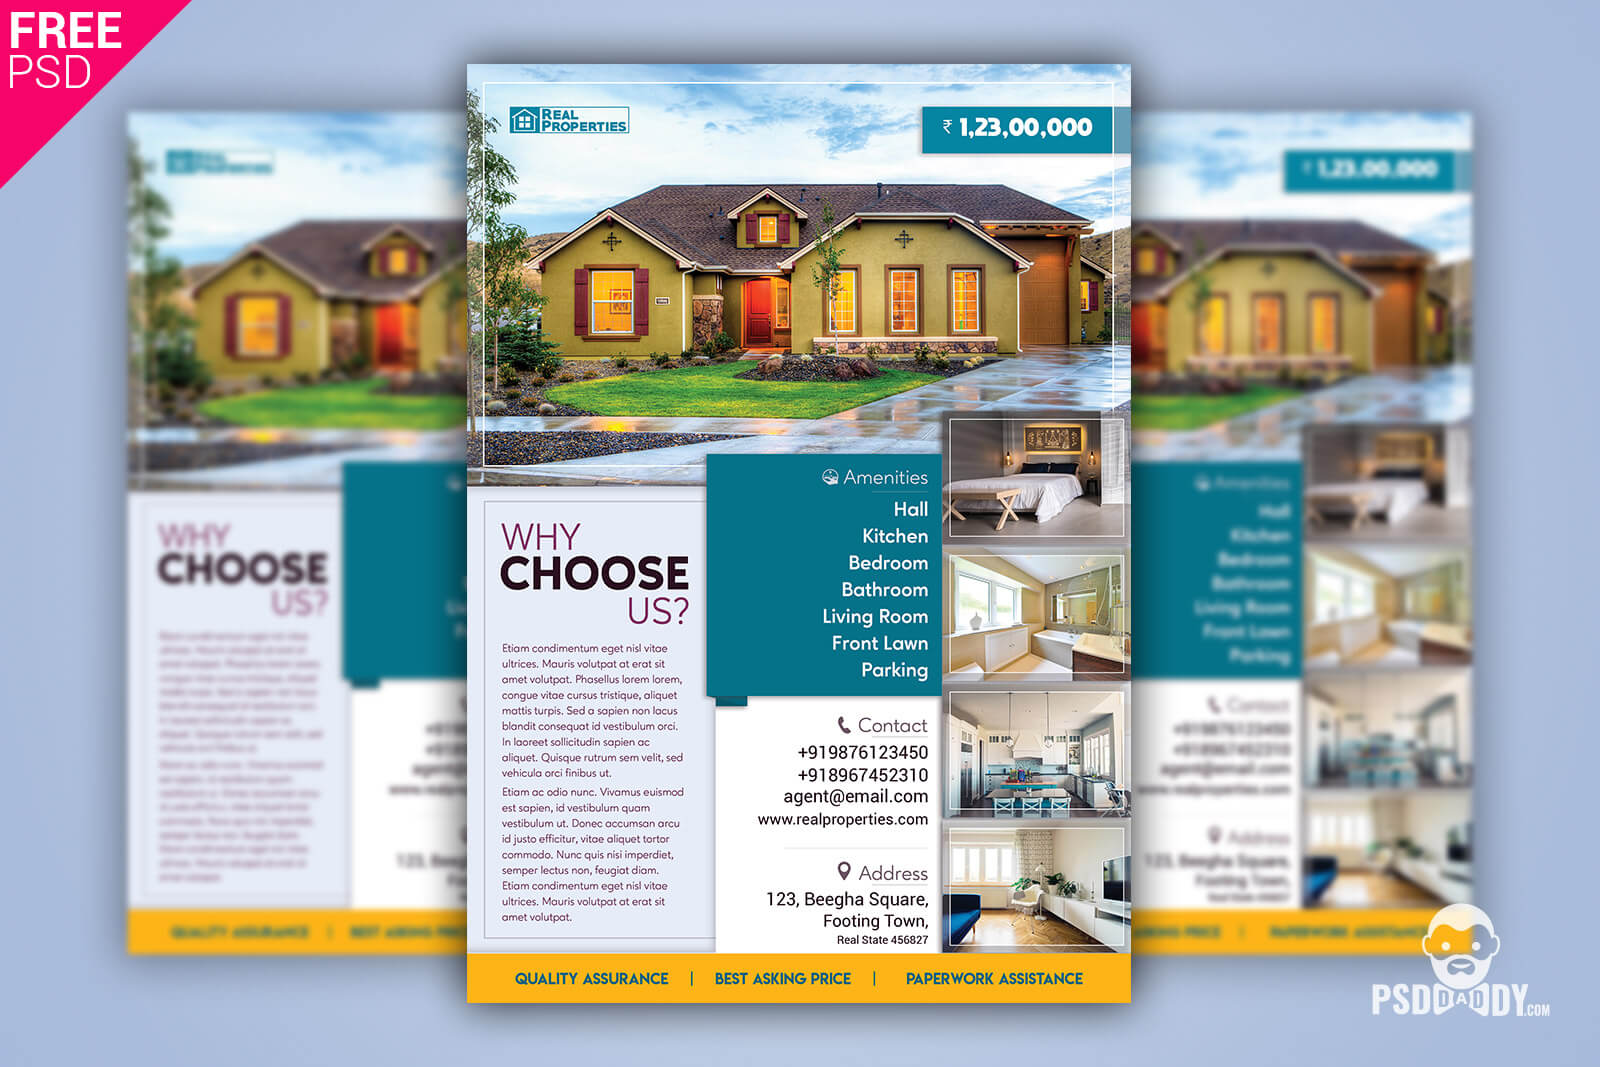 Real Estate Flyer + Social Media Free Psd Template Intended For Real Estate Brochure Templates Psd Free Download